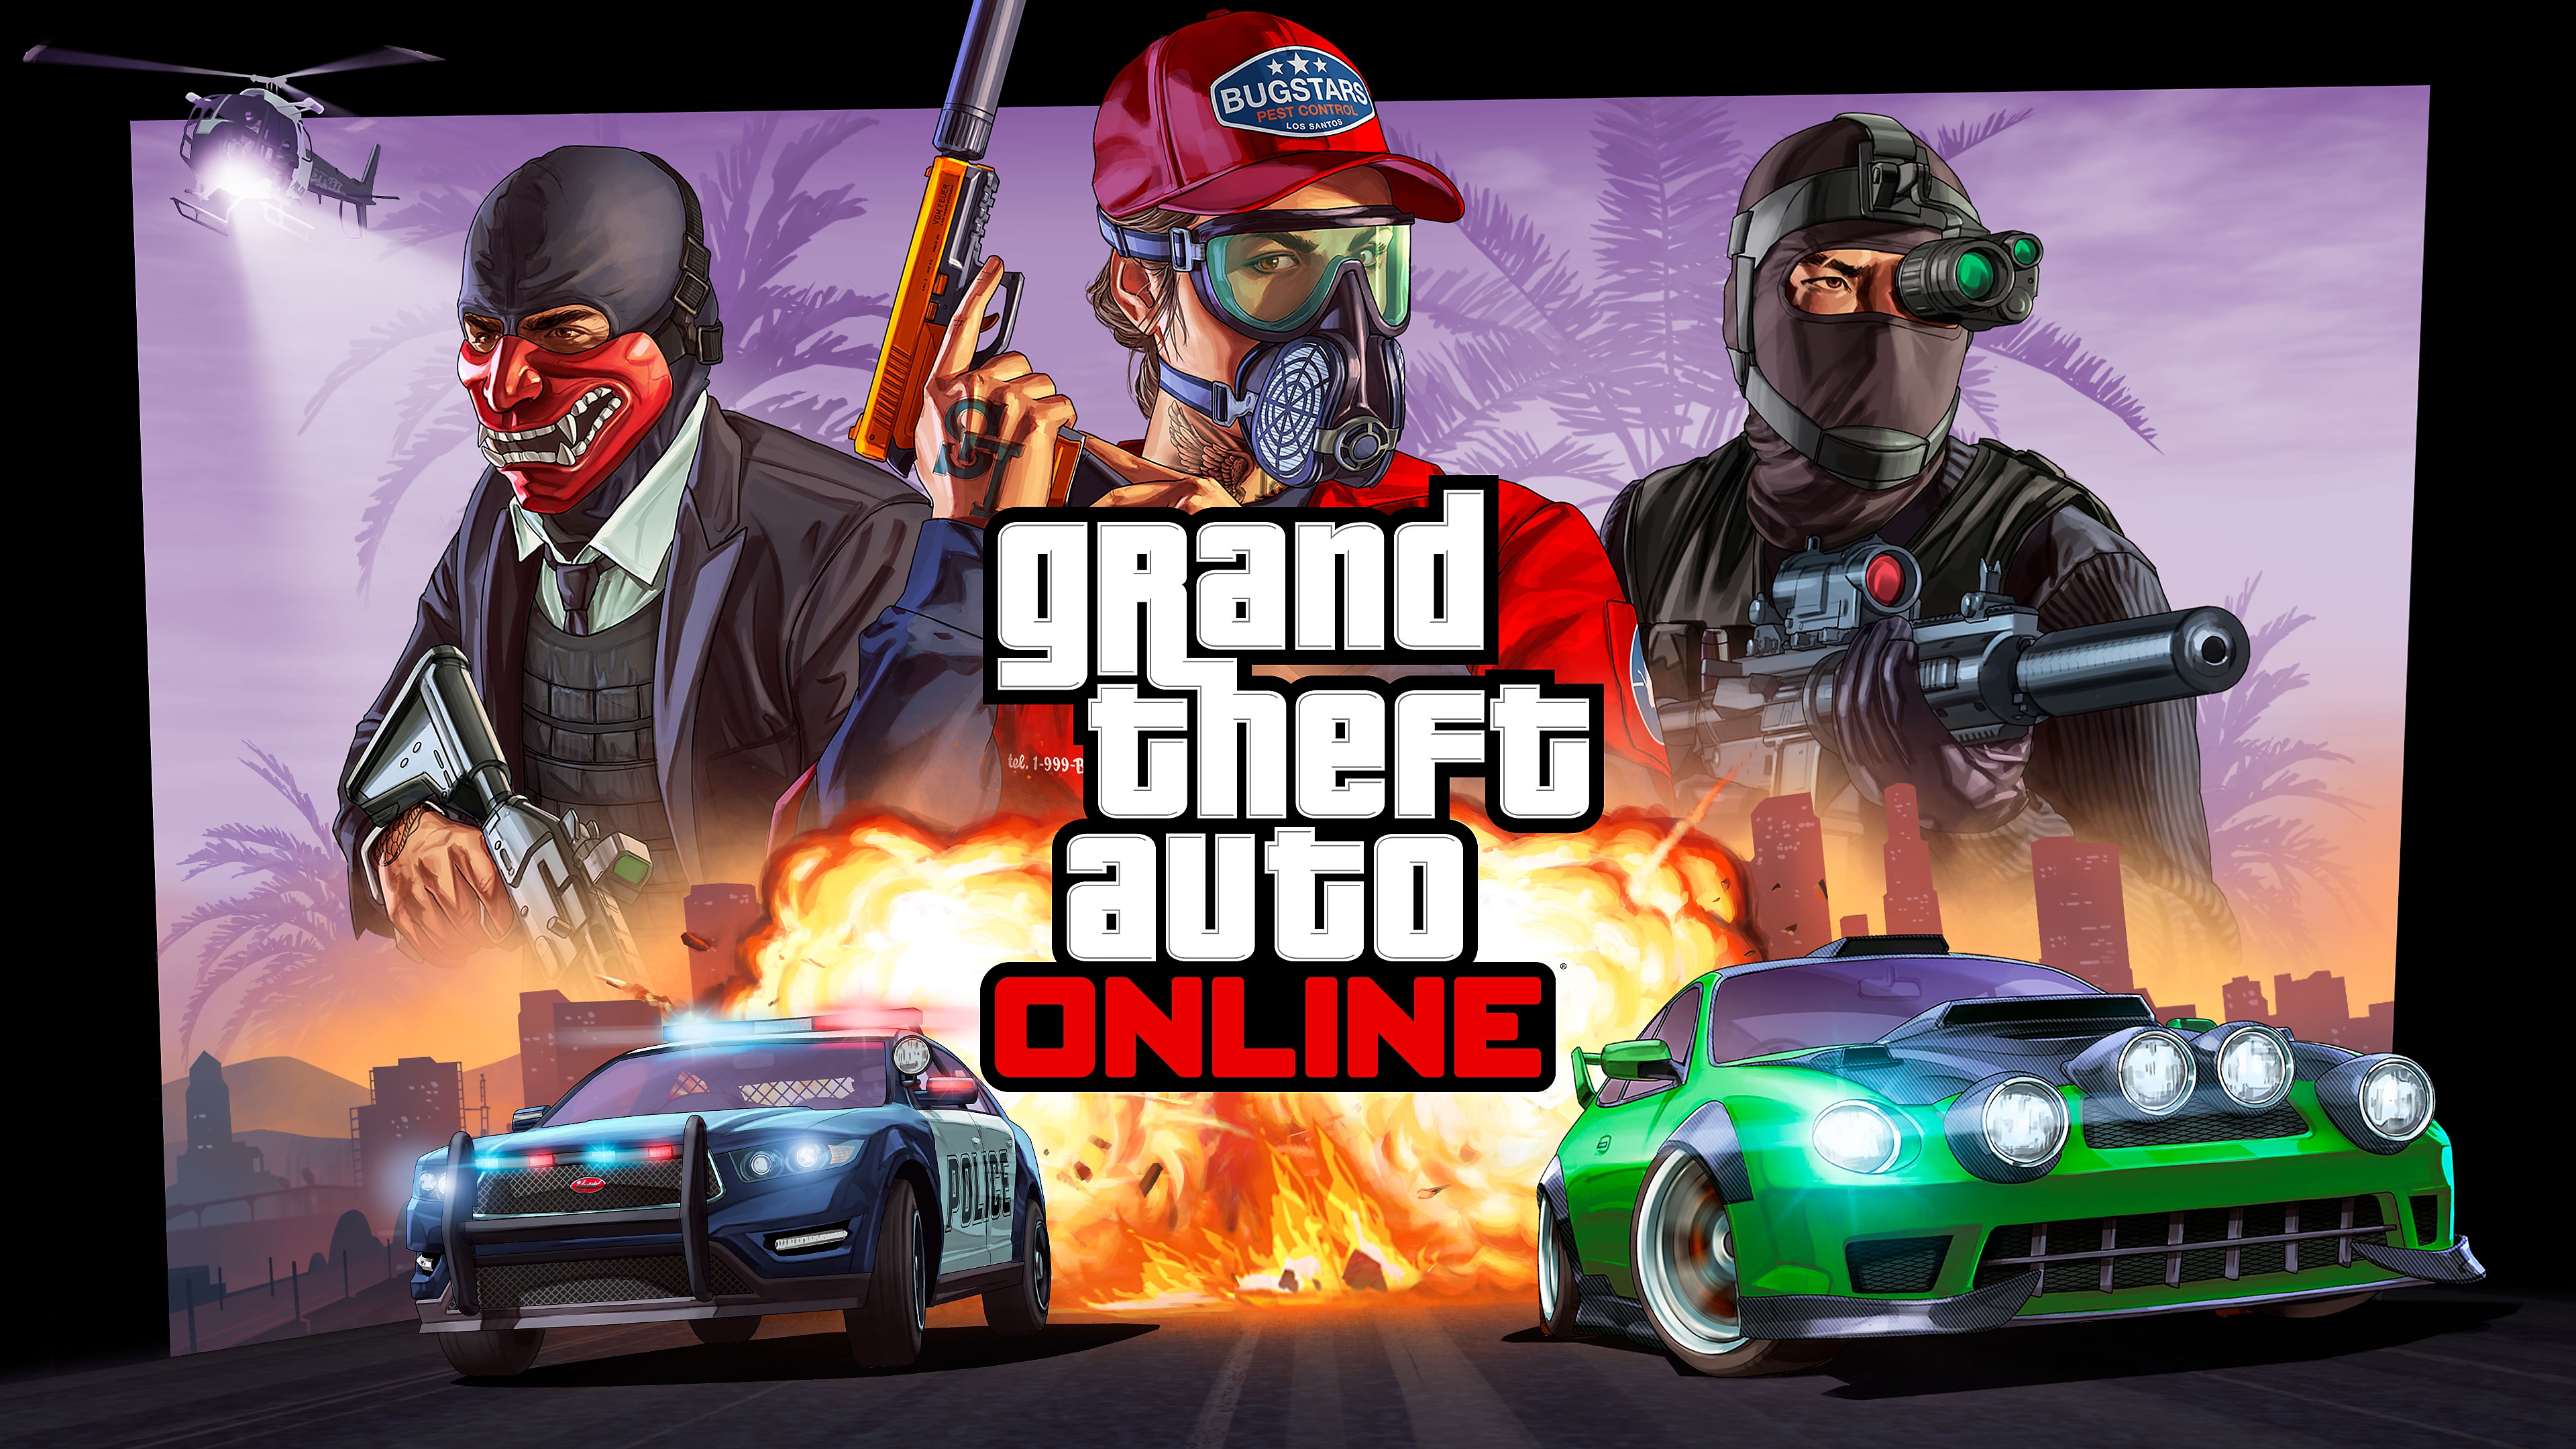 Grand Theft Auto Online Key Art showing a street-racing car being chased by a police car and three characters above.